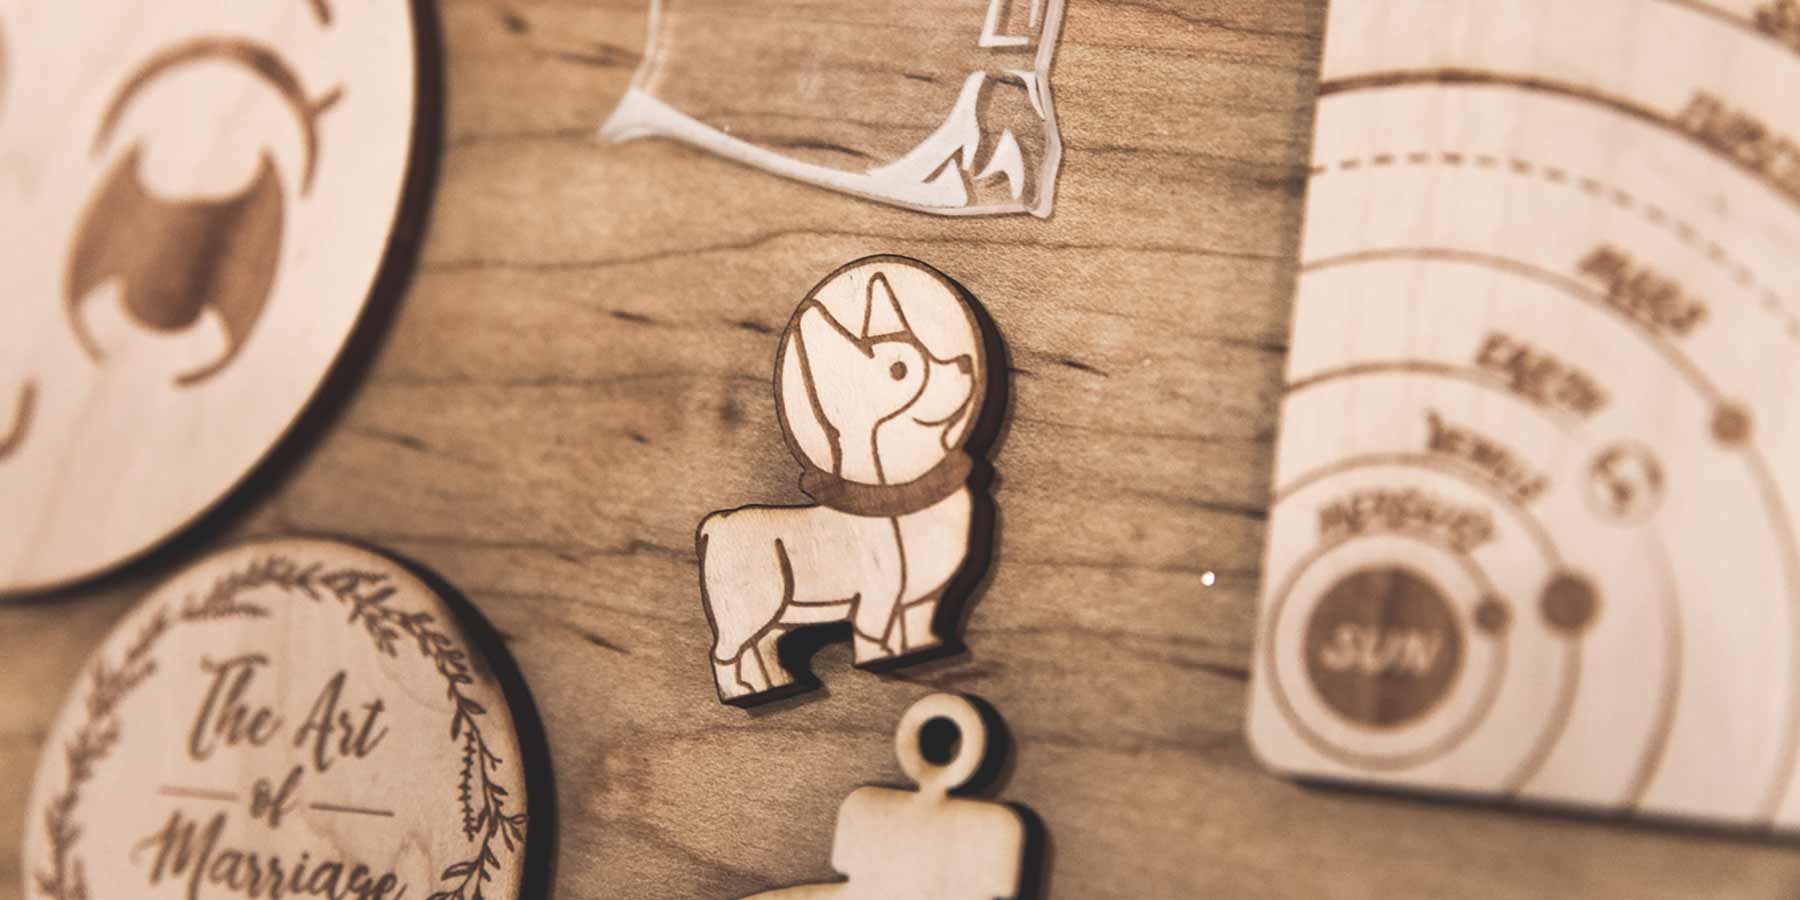 Laser edged astronaut dog at the Maker Bean Cafe